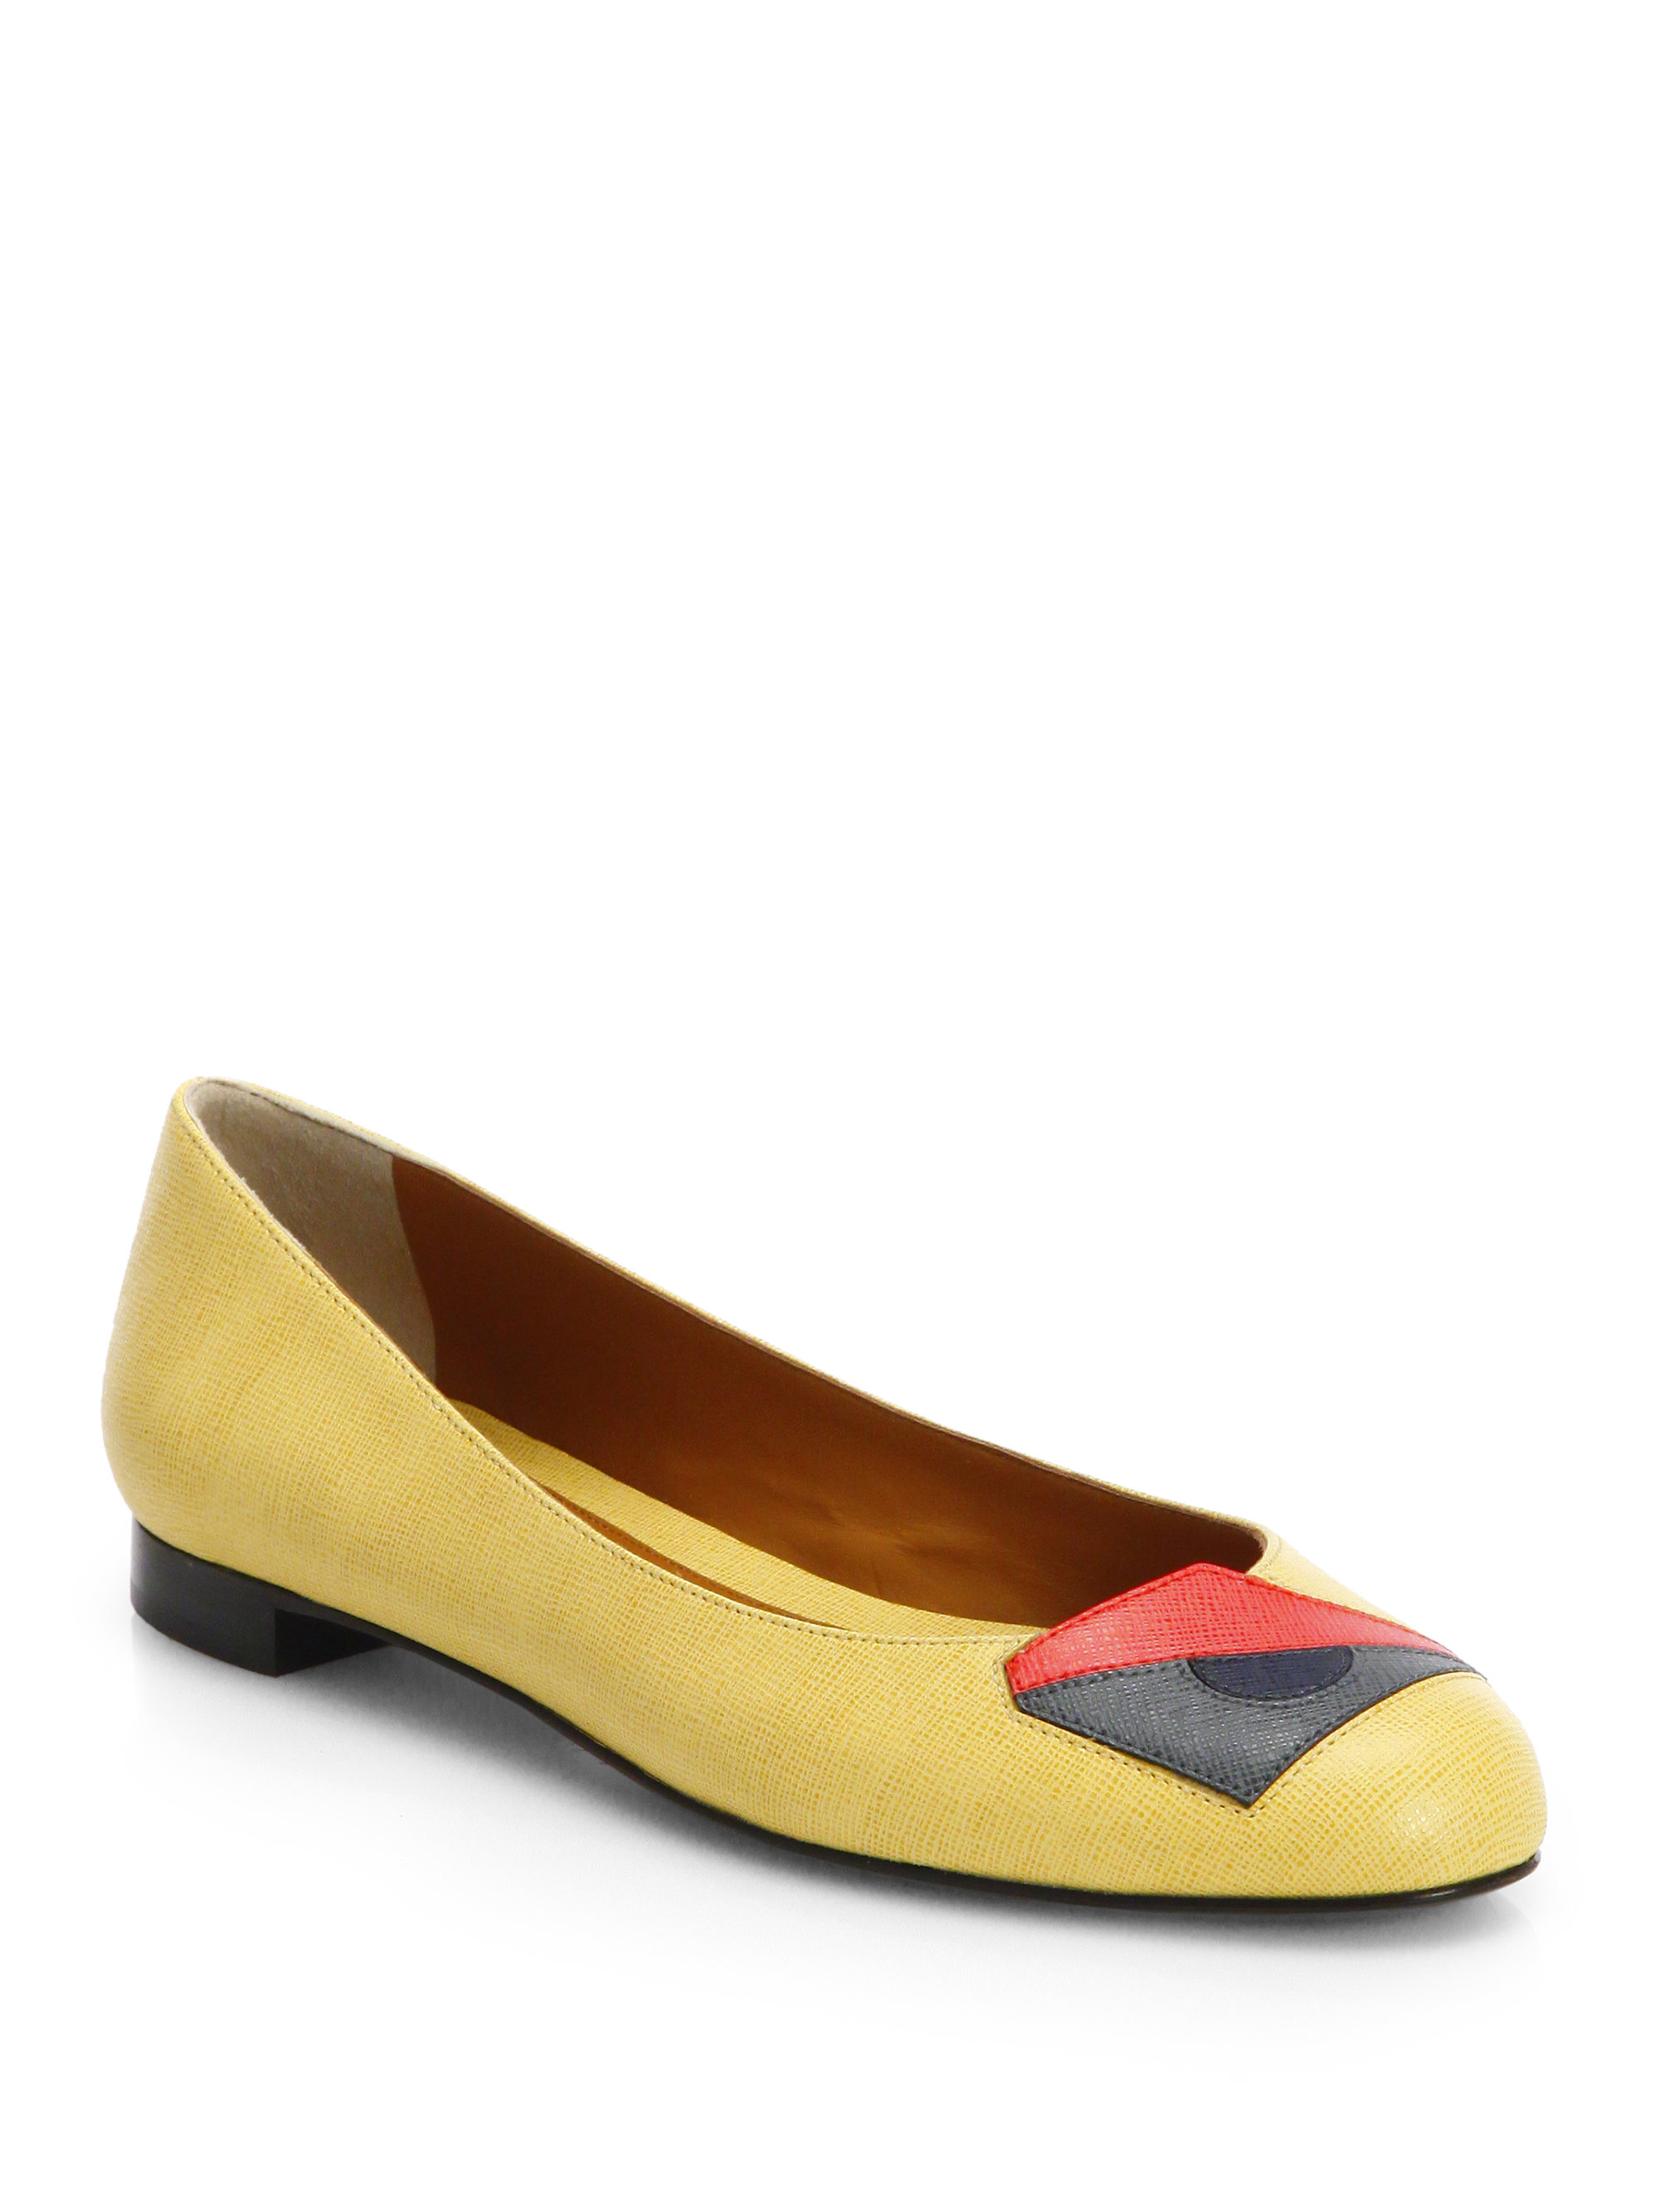 Fendi Monster Saffiano Leather Ballet Flats in Yellow | Lyst